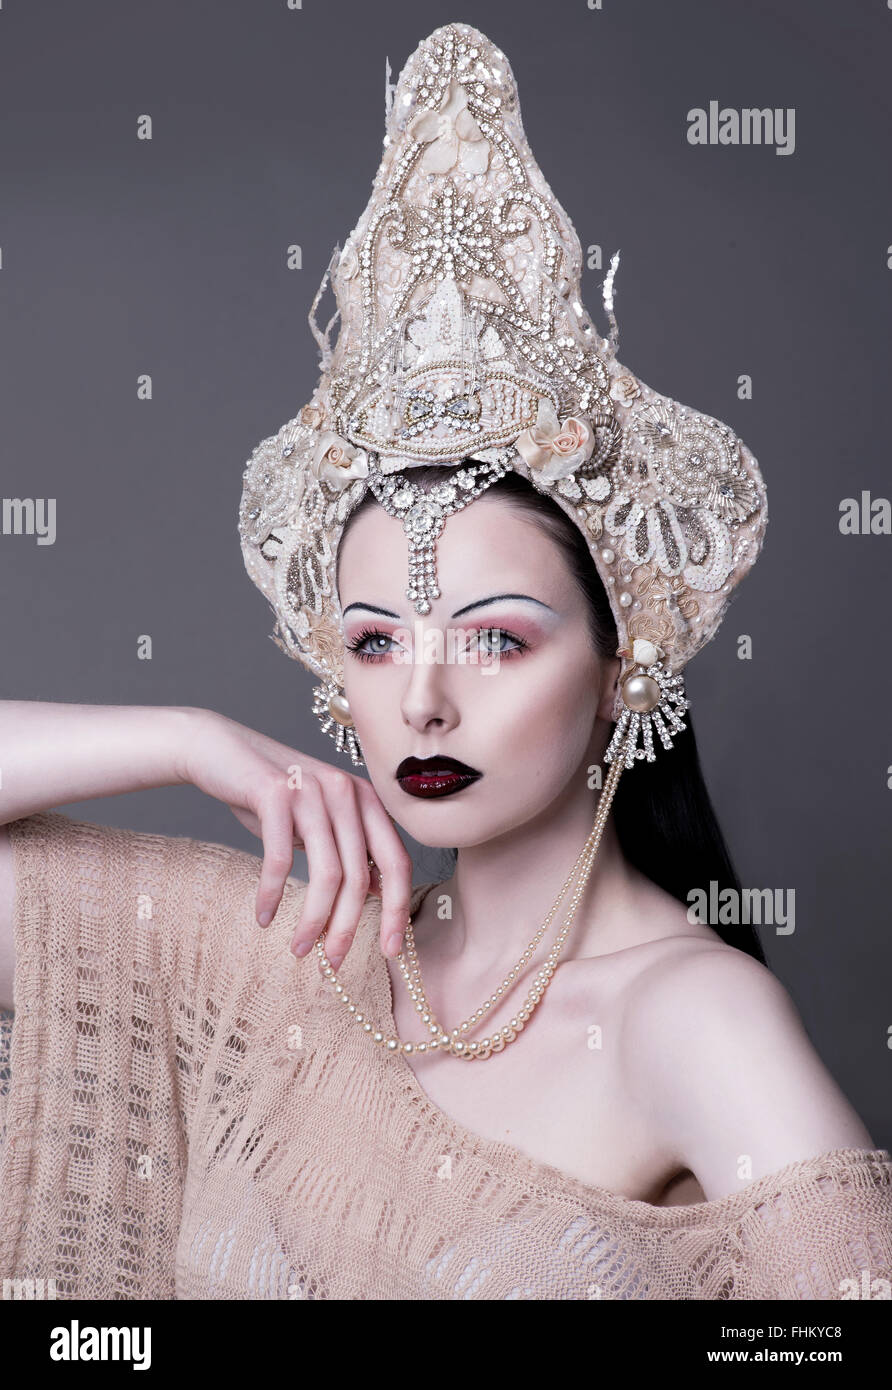 Beautiful fashion model Liv Free with her Game of Thrones style headpiece, amazing makeup and pale white skin Stock Photo